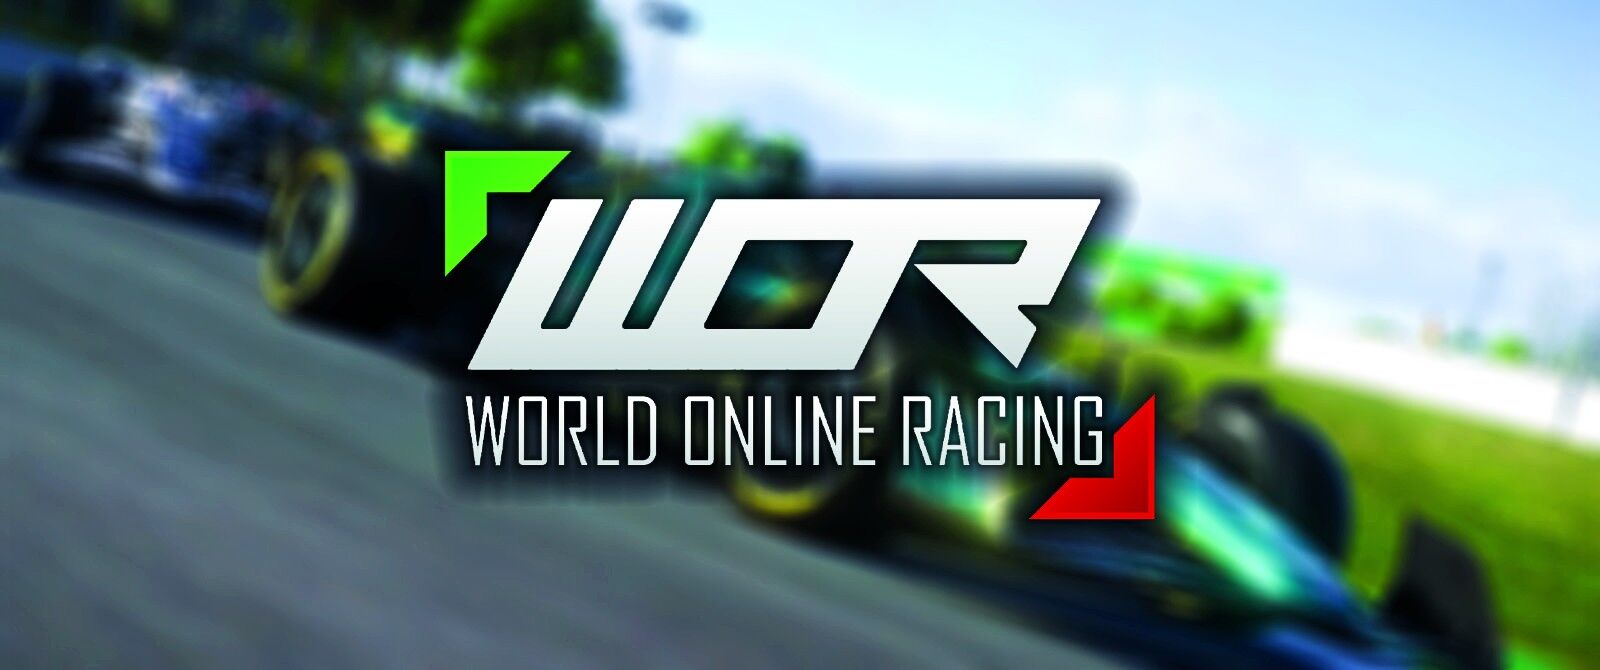 World Online Racing logo with backdrop of Aston Martin from F1 22.